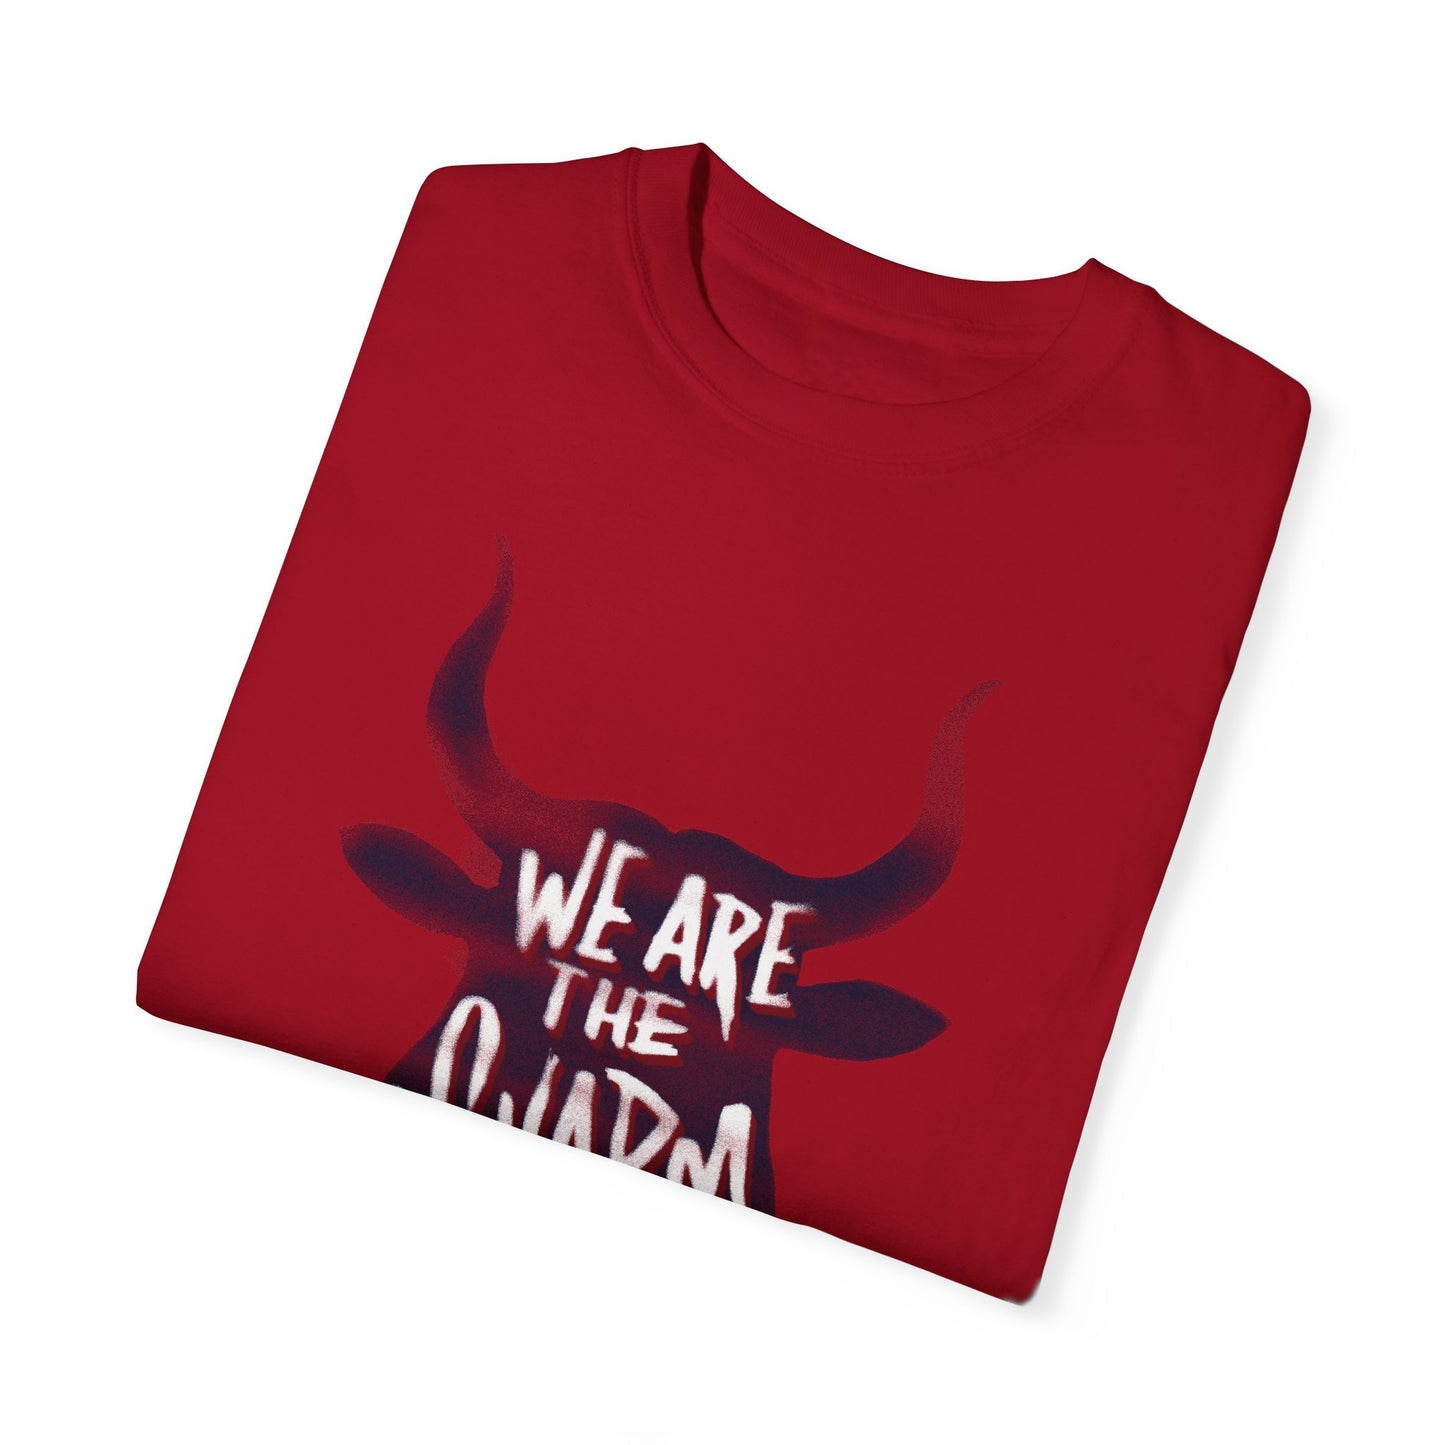 We Are The Swarm Unisex Comfort Colors T-shirt